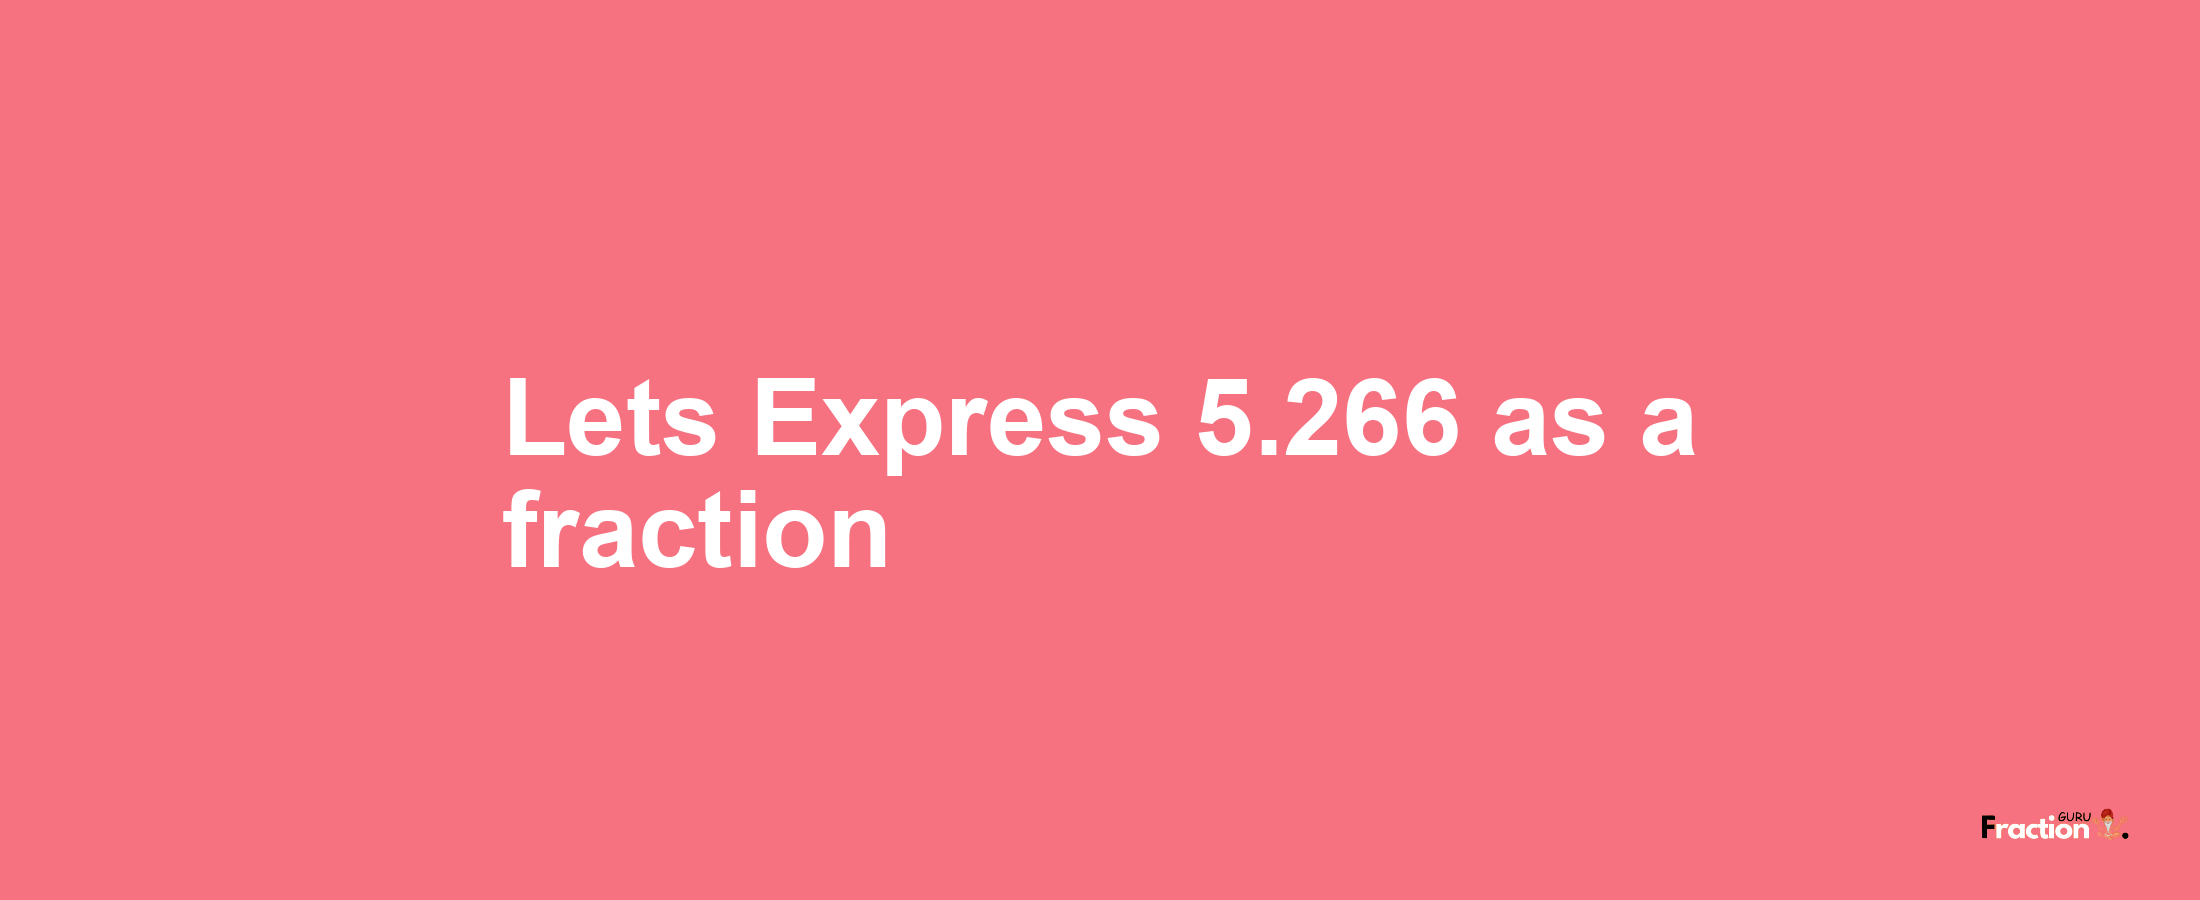 Lets Express 5.266 as afraction